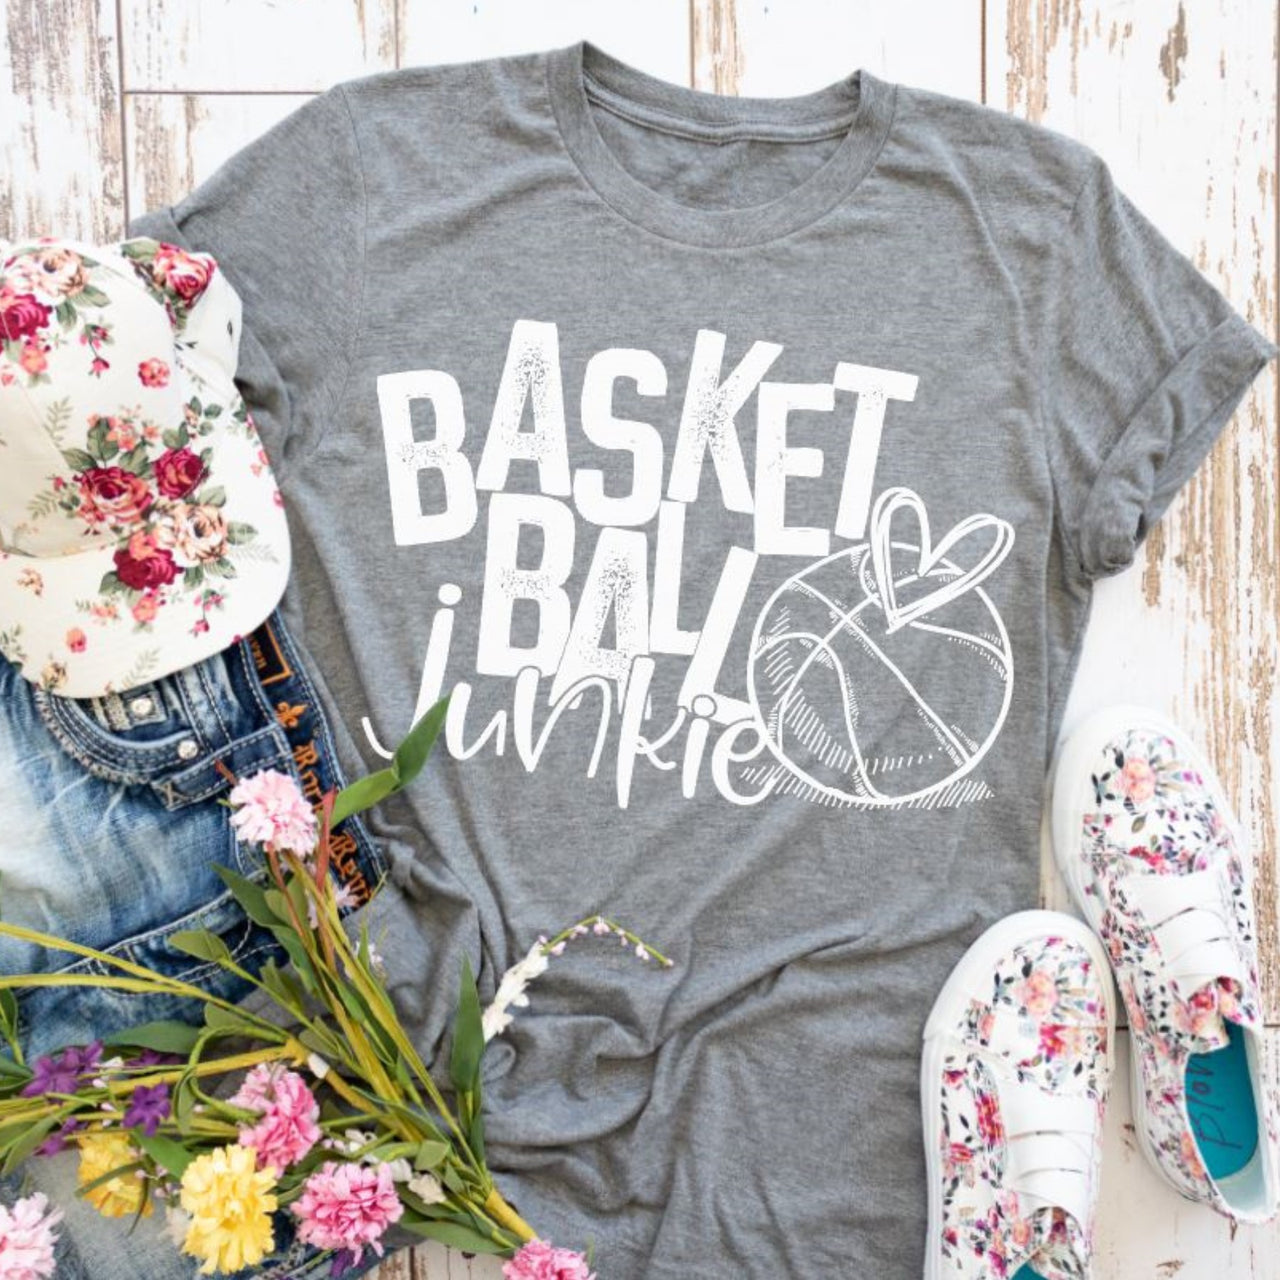 Basketball Junkie - Unisex Tee (You pick the tee color)